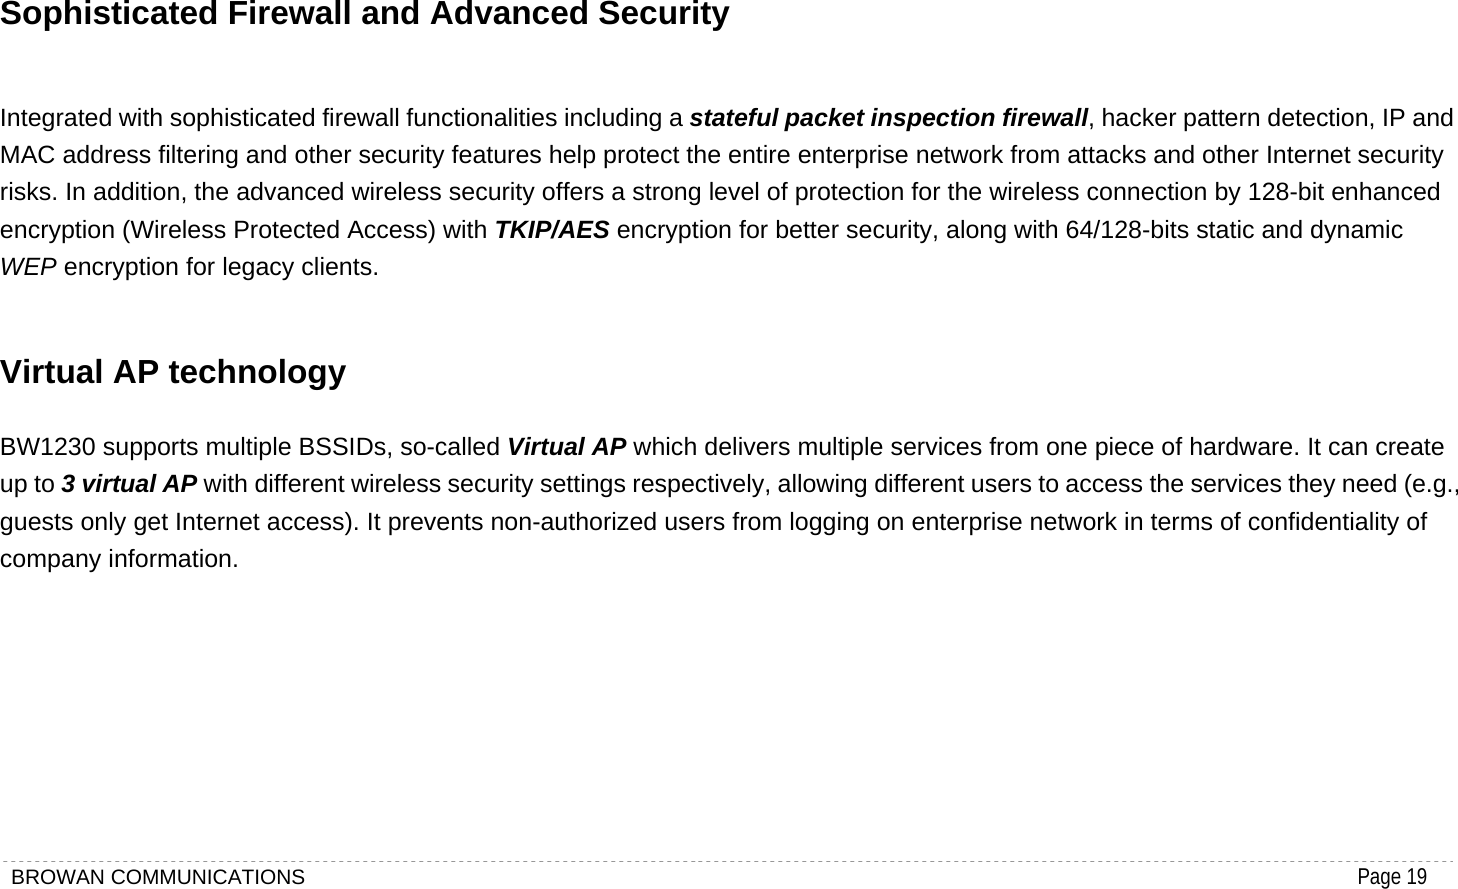 BROWAN COMMUNICATIONS                                                                                           Page 19  Sophisticated Firewall and Advanced Security Integrated with sophisticated firewall functionalities including a stateful packet inspection firewall, hacker pattern detection, IP and MAC address filtering and other security features help protect the entire enterprise network from attacks and other Internet security risks. In addition, the advanced wireless security offers a strong level of protection for the wireless connection by 128-bit enhanced encryption (Wireless Protected Access) with TKIP/AES encryption for better security, along with 64/128-bits static and dynamic WEP encryption for legacy clients. Virtual AP technology BW1230 supports multiple BSSIDs, so-called Virtual AP which delivers multiple services from one piece of hardware. It can create up to 3 virtual AP with different wireless security settings respectively, allowing different users to access the services they need (e.g., guests only get Internet access). It prevents non-authorized users from logging on enterprise network in terms of confidentiality of company information.         